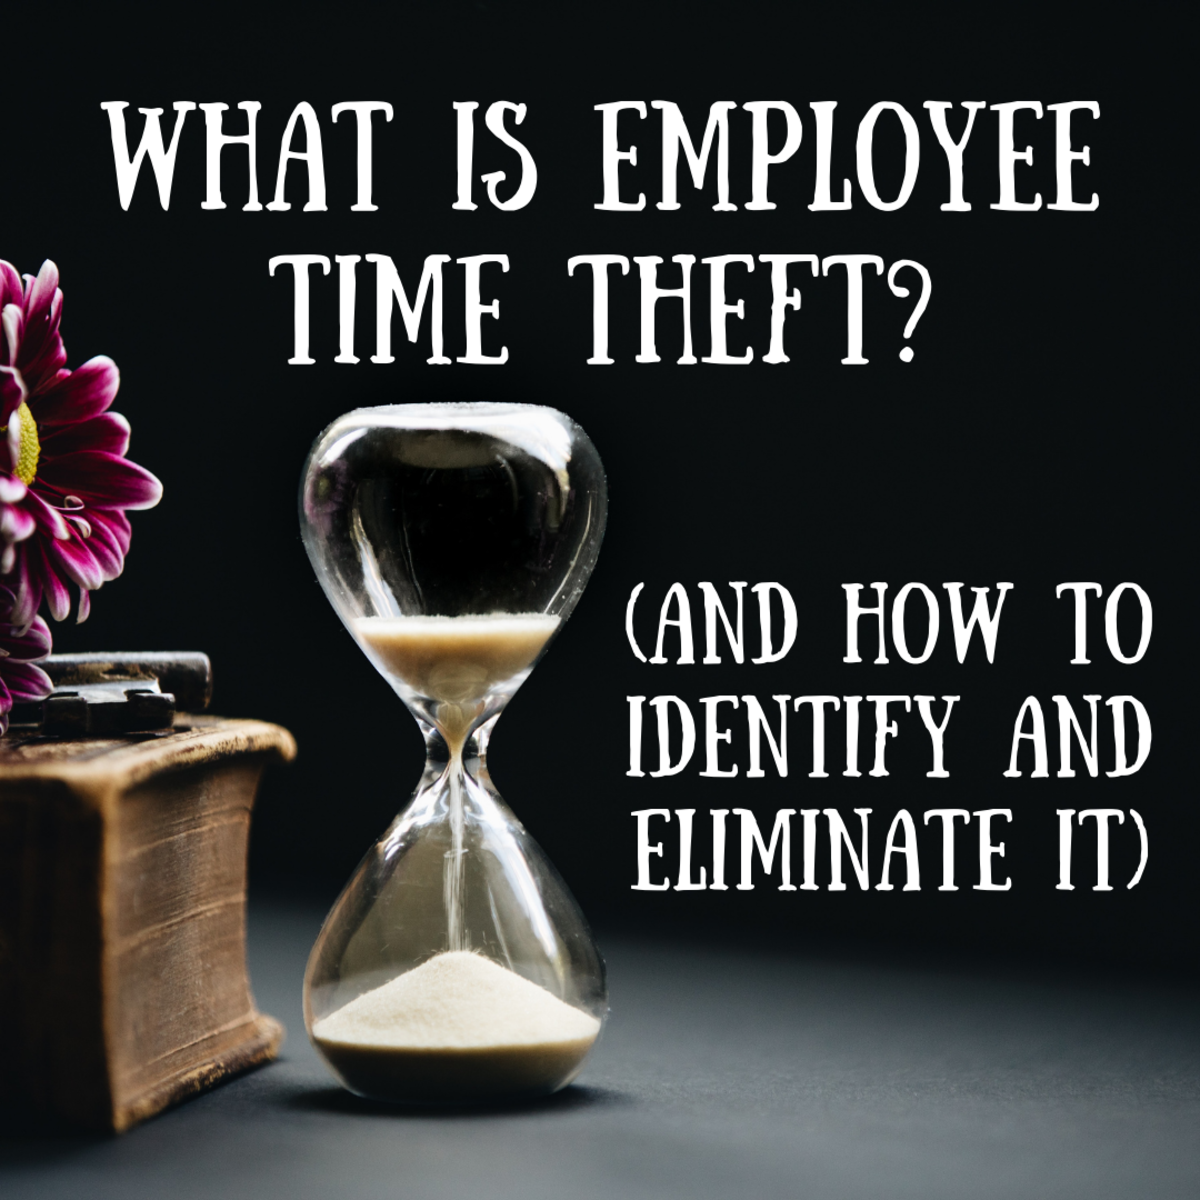 What Is Employee Time Theft? (How to Identify and Eliminate It)